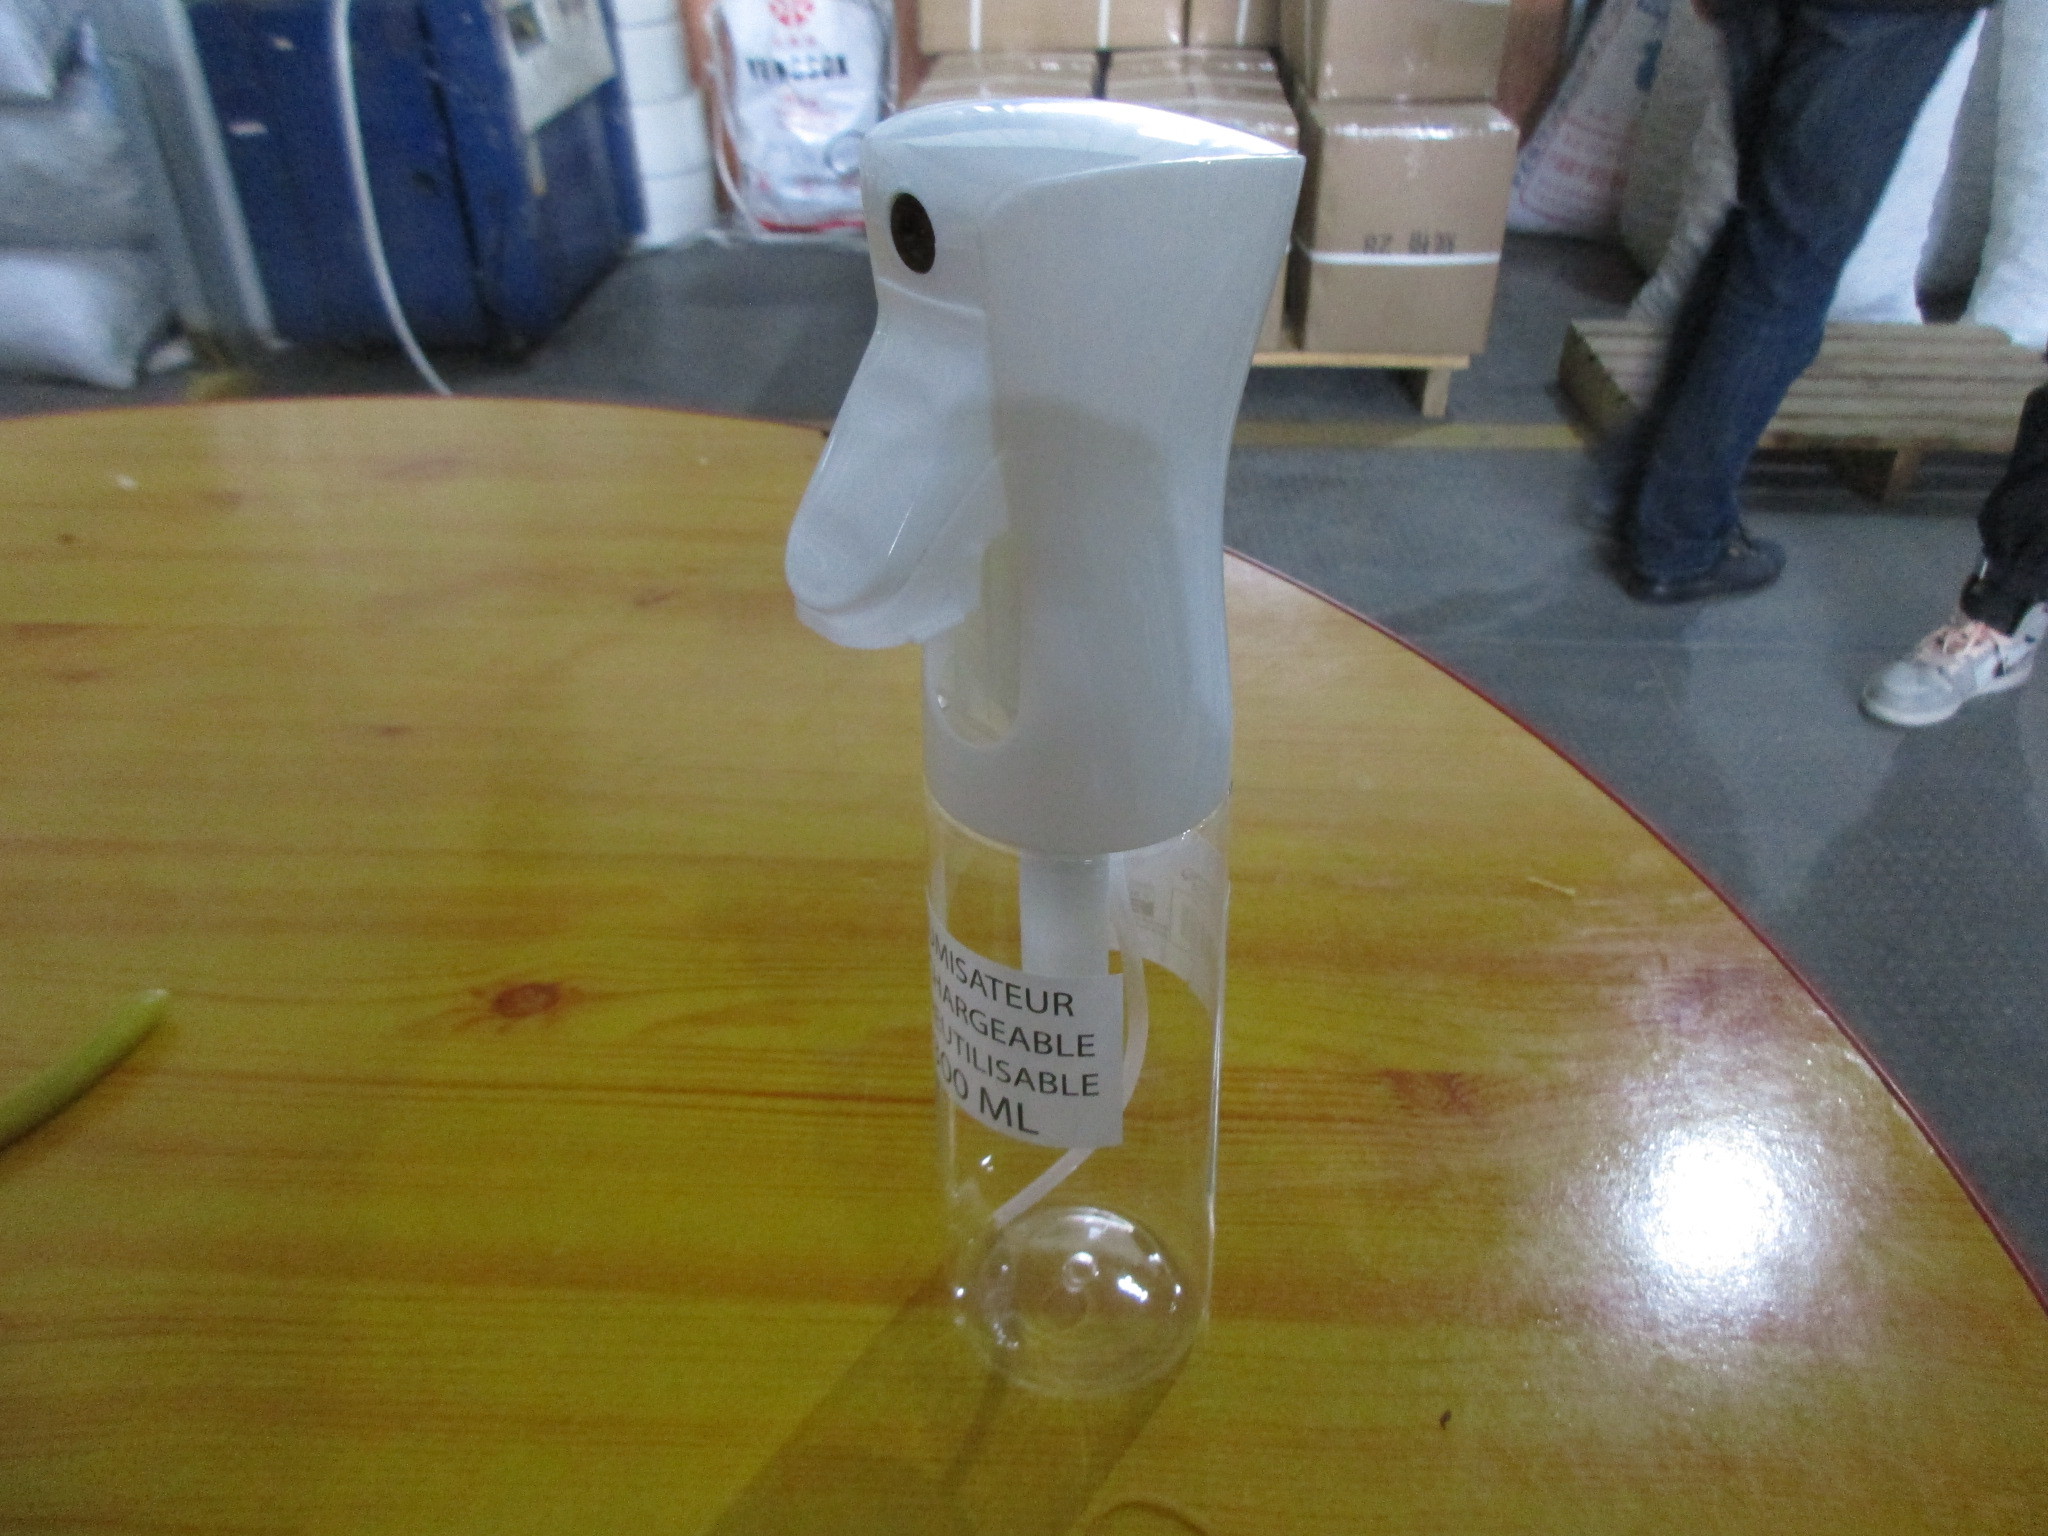 Wholesale Randomly Sample Select AQL QC Inline Quality Inspection from china suppliers